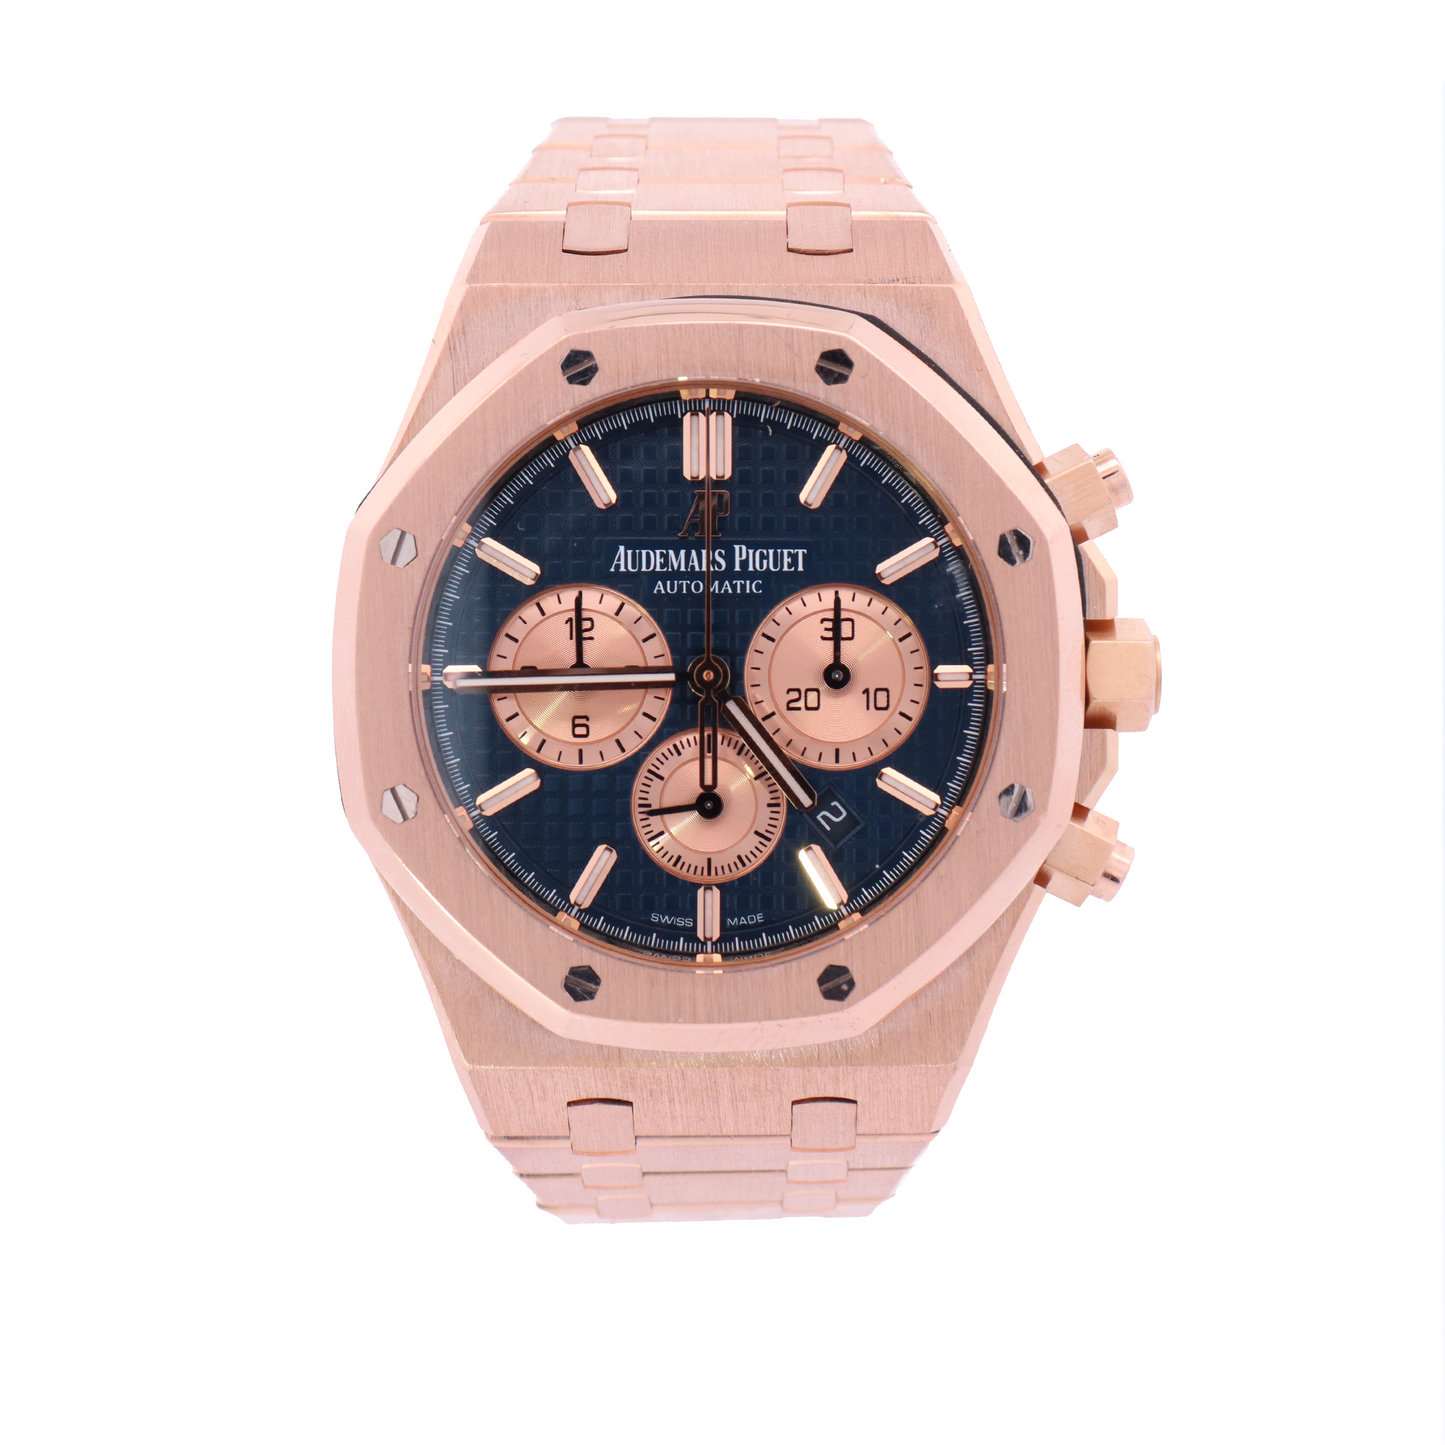 Audemars Piguet Royal Oak Rose Gold 41mm Blue Chronograph Dial Watch | Ref# 26331OR.OO.1220OR.01 - Happy Jewelers Fine Jewelry Lifetime Warranty